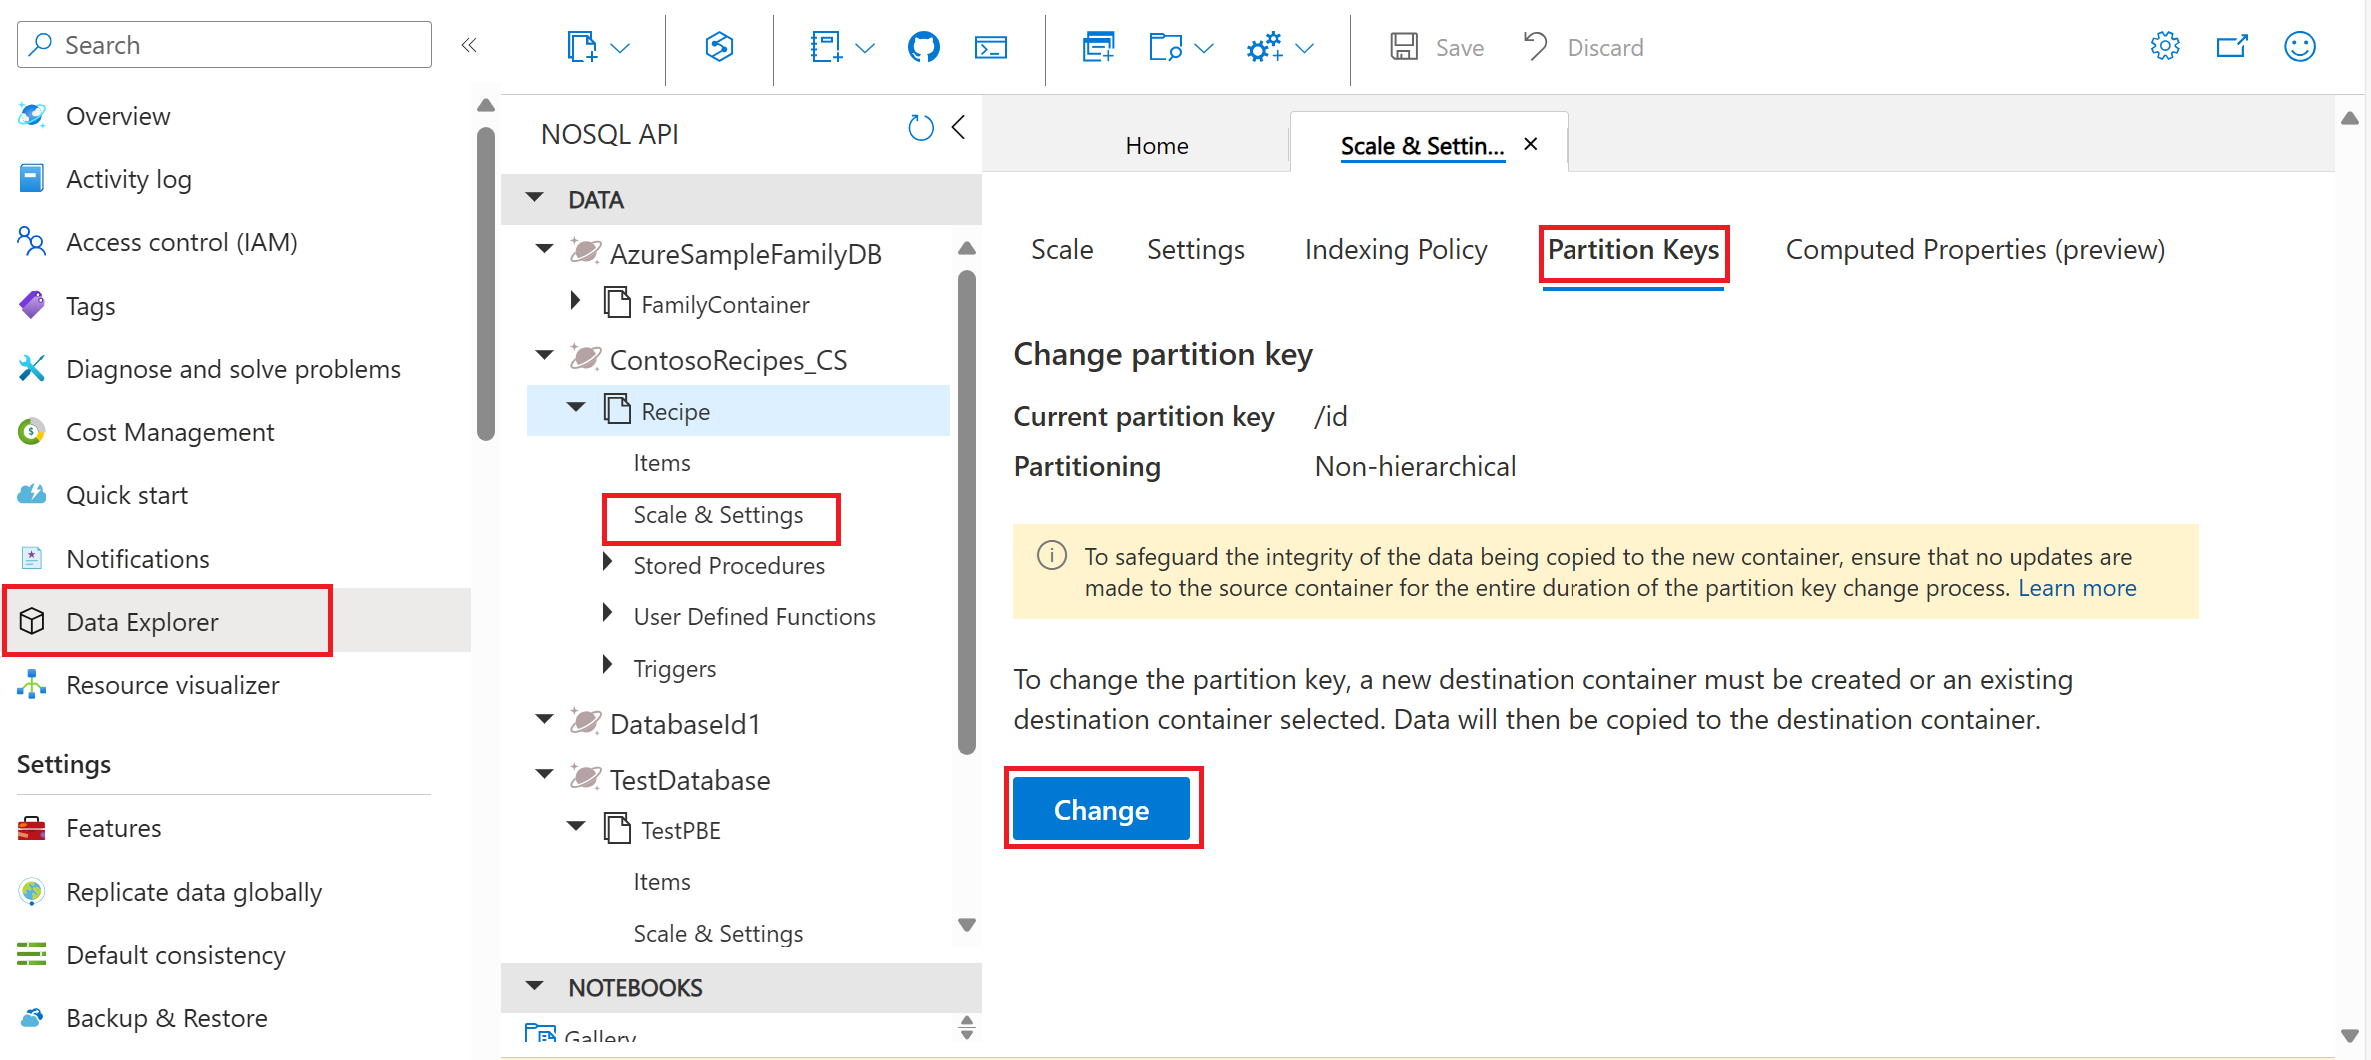 Screenshot of the Change partition key feature in the Data Explorer in an Azure Cosmos DB account.